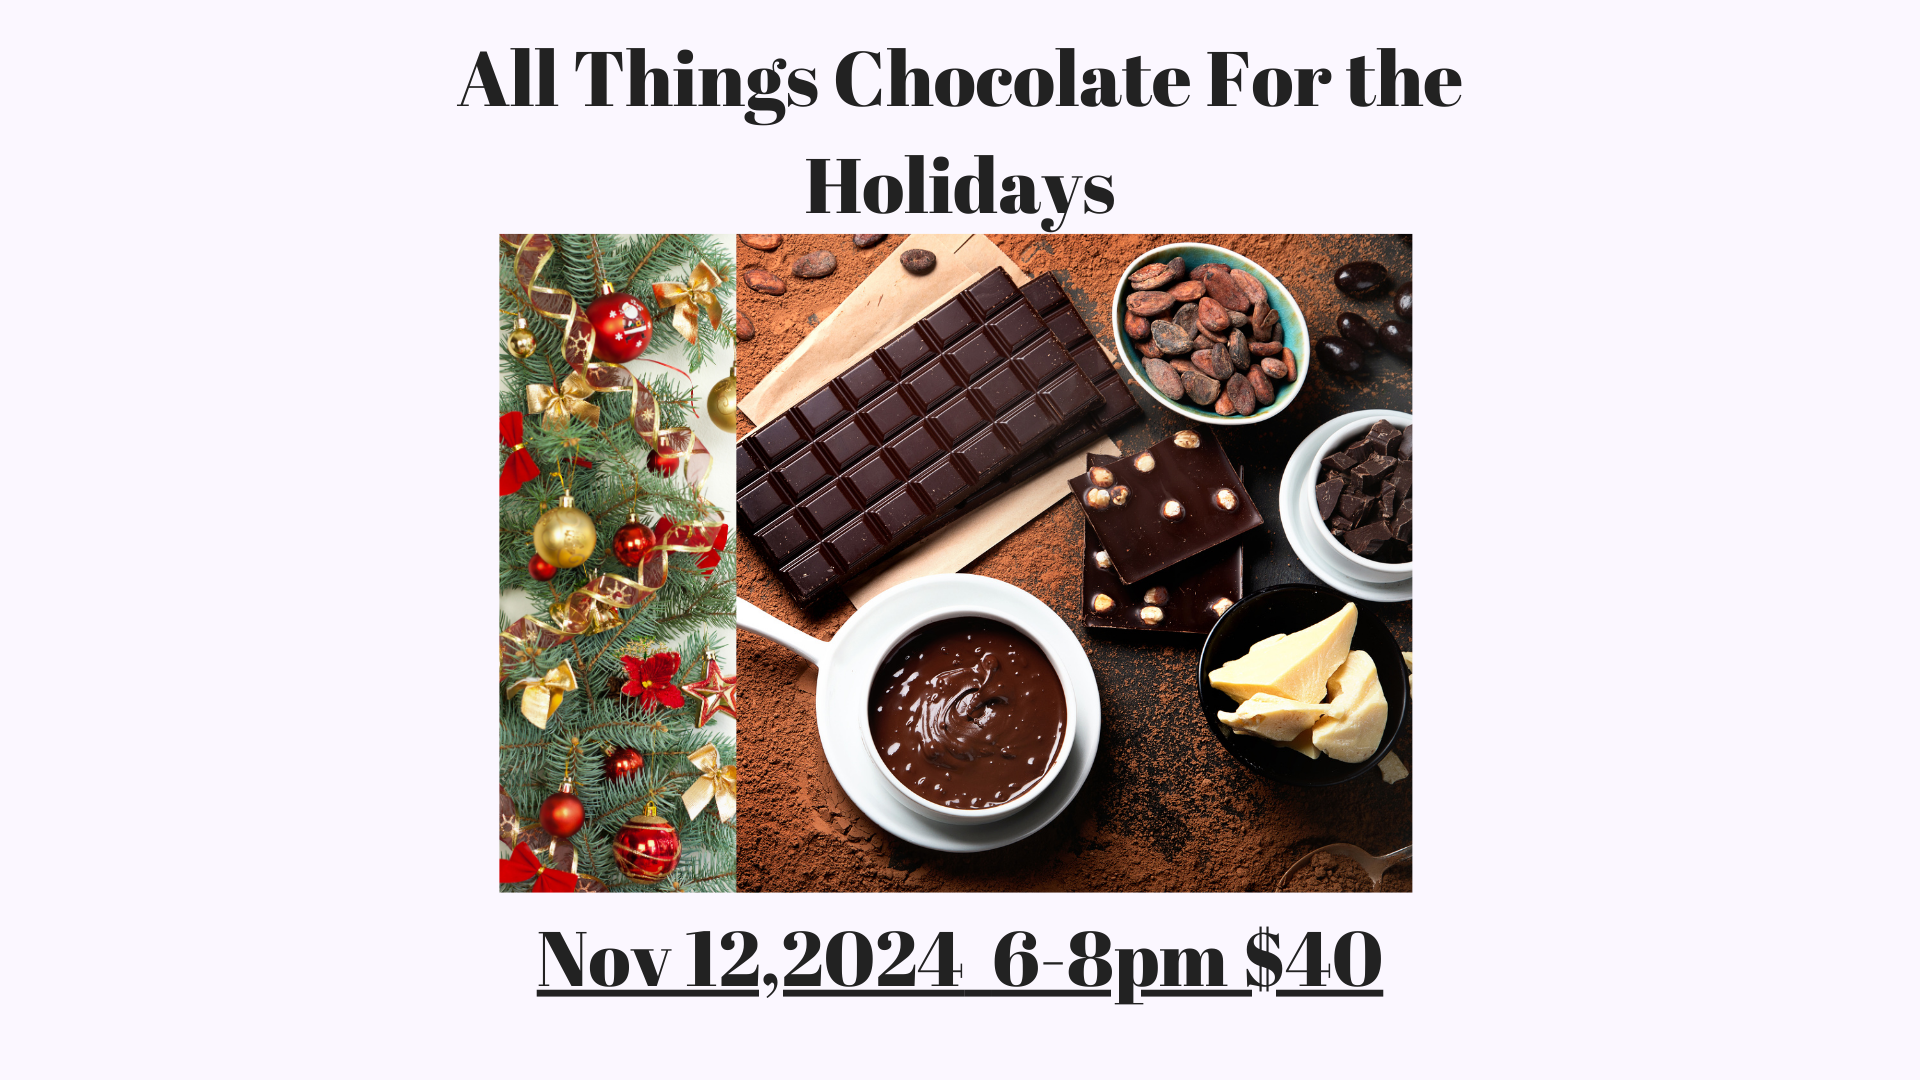 All Things Chocolate For the Holidays Poster